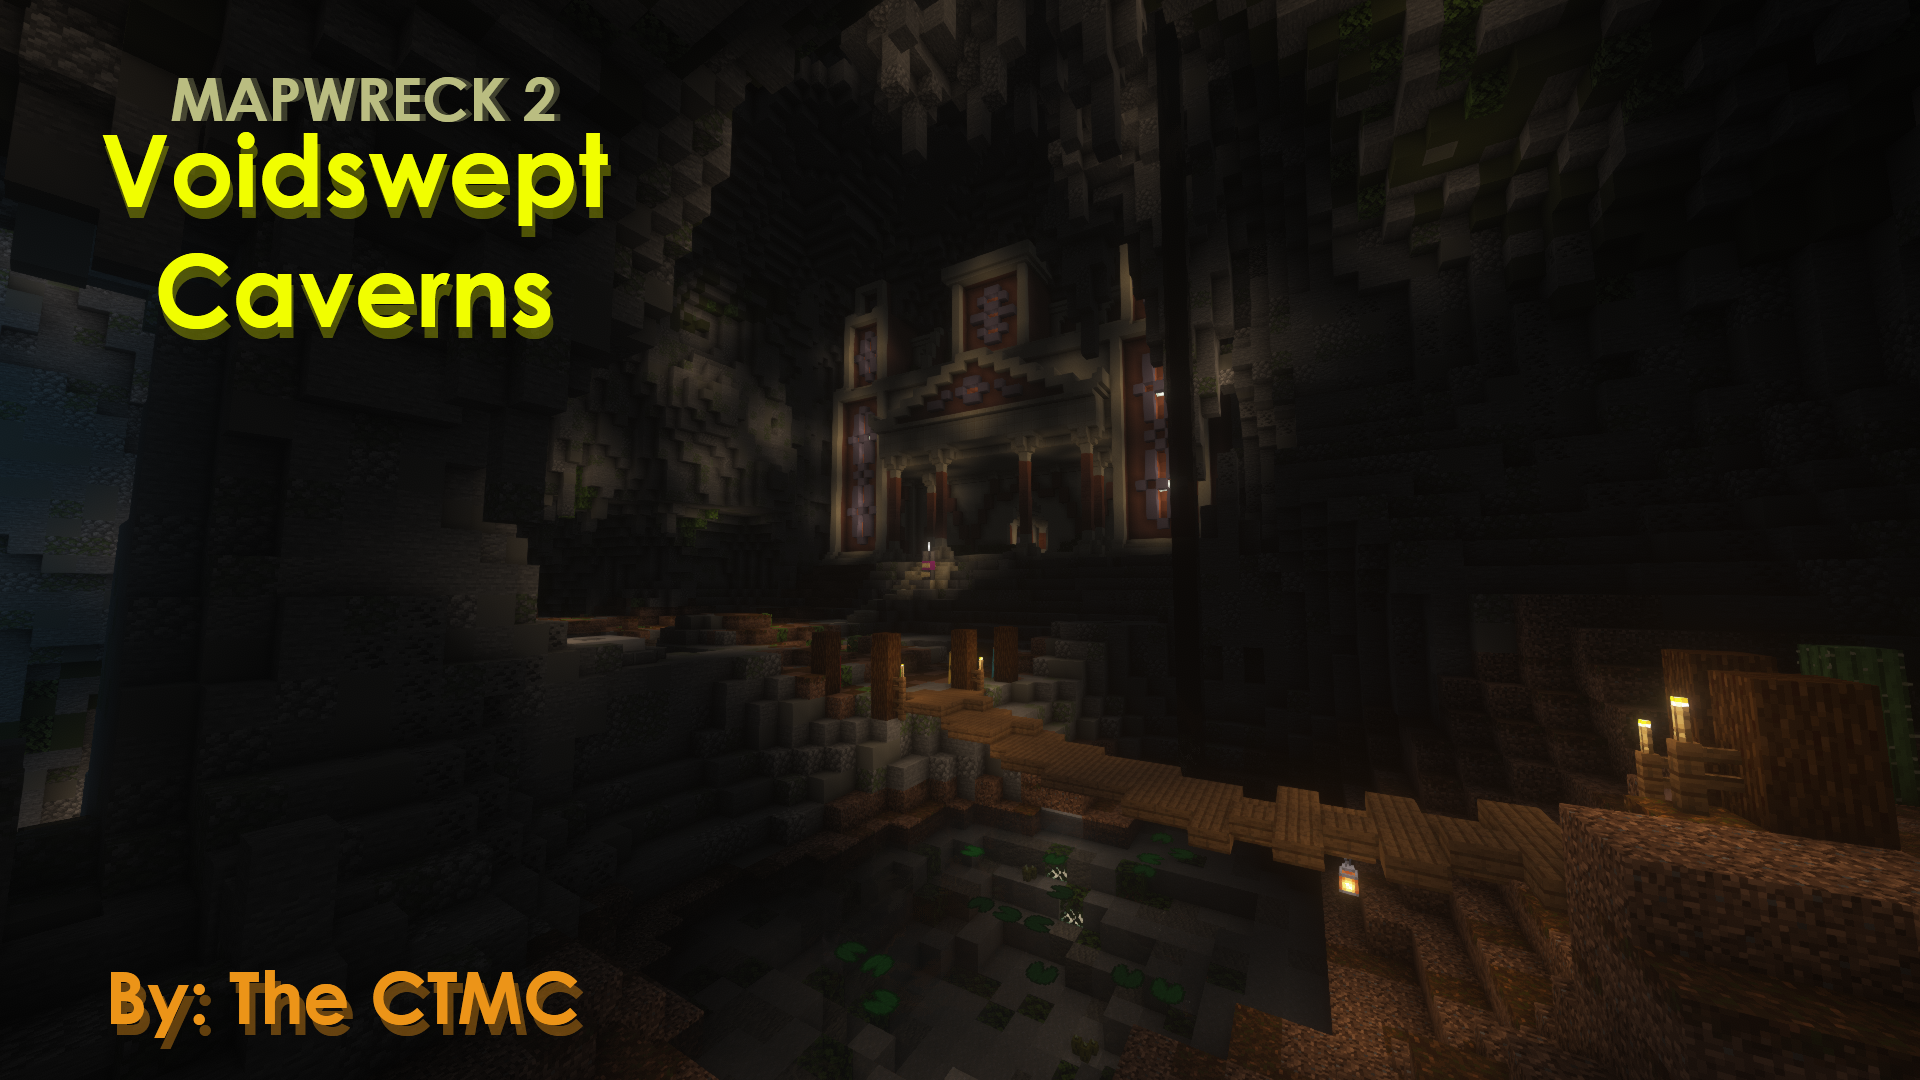 Download Mapwreck 2 - Voidswept Caverns for Minecraft 1.16.5